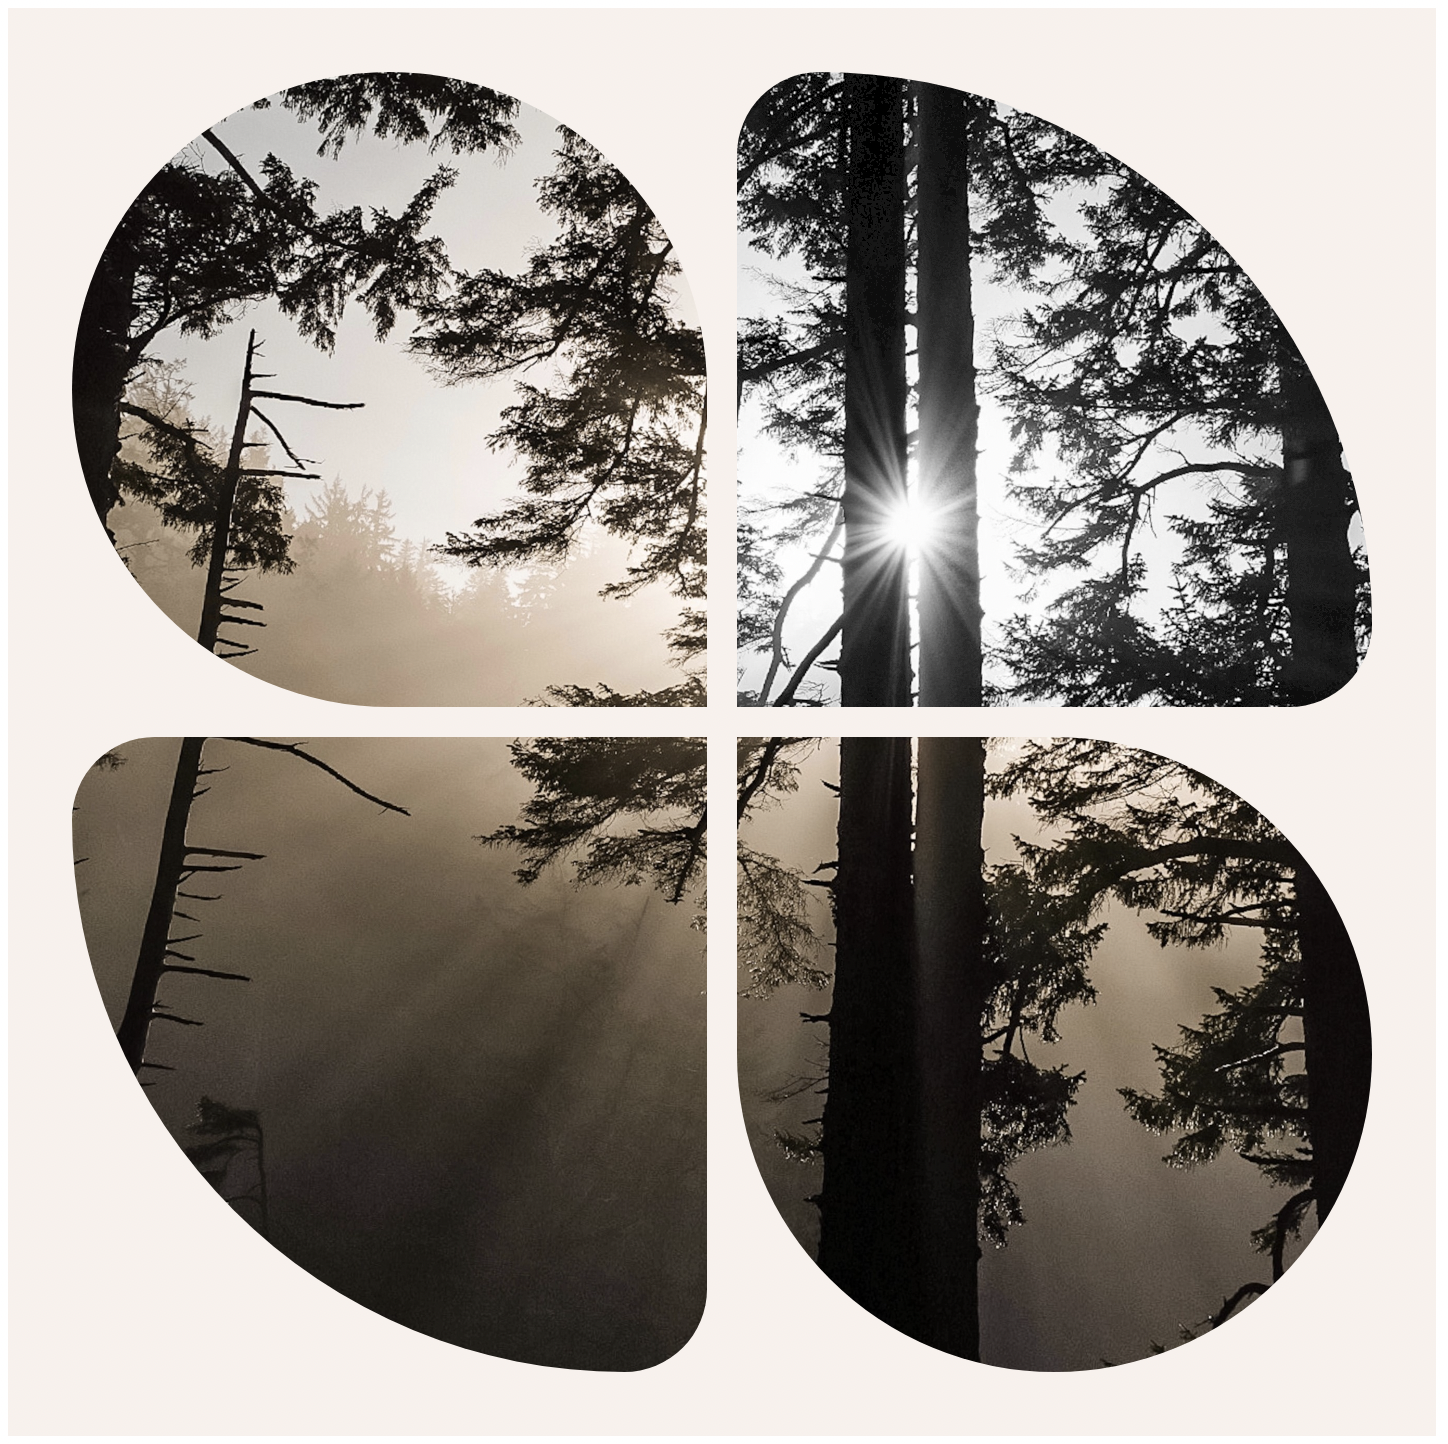 Image of light shining through trees separated into four squares with different sides and the square with the light shining through in black and white.